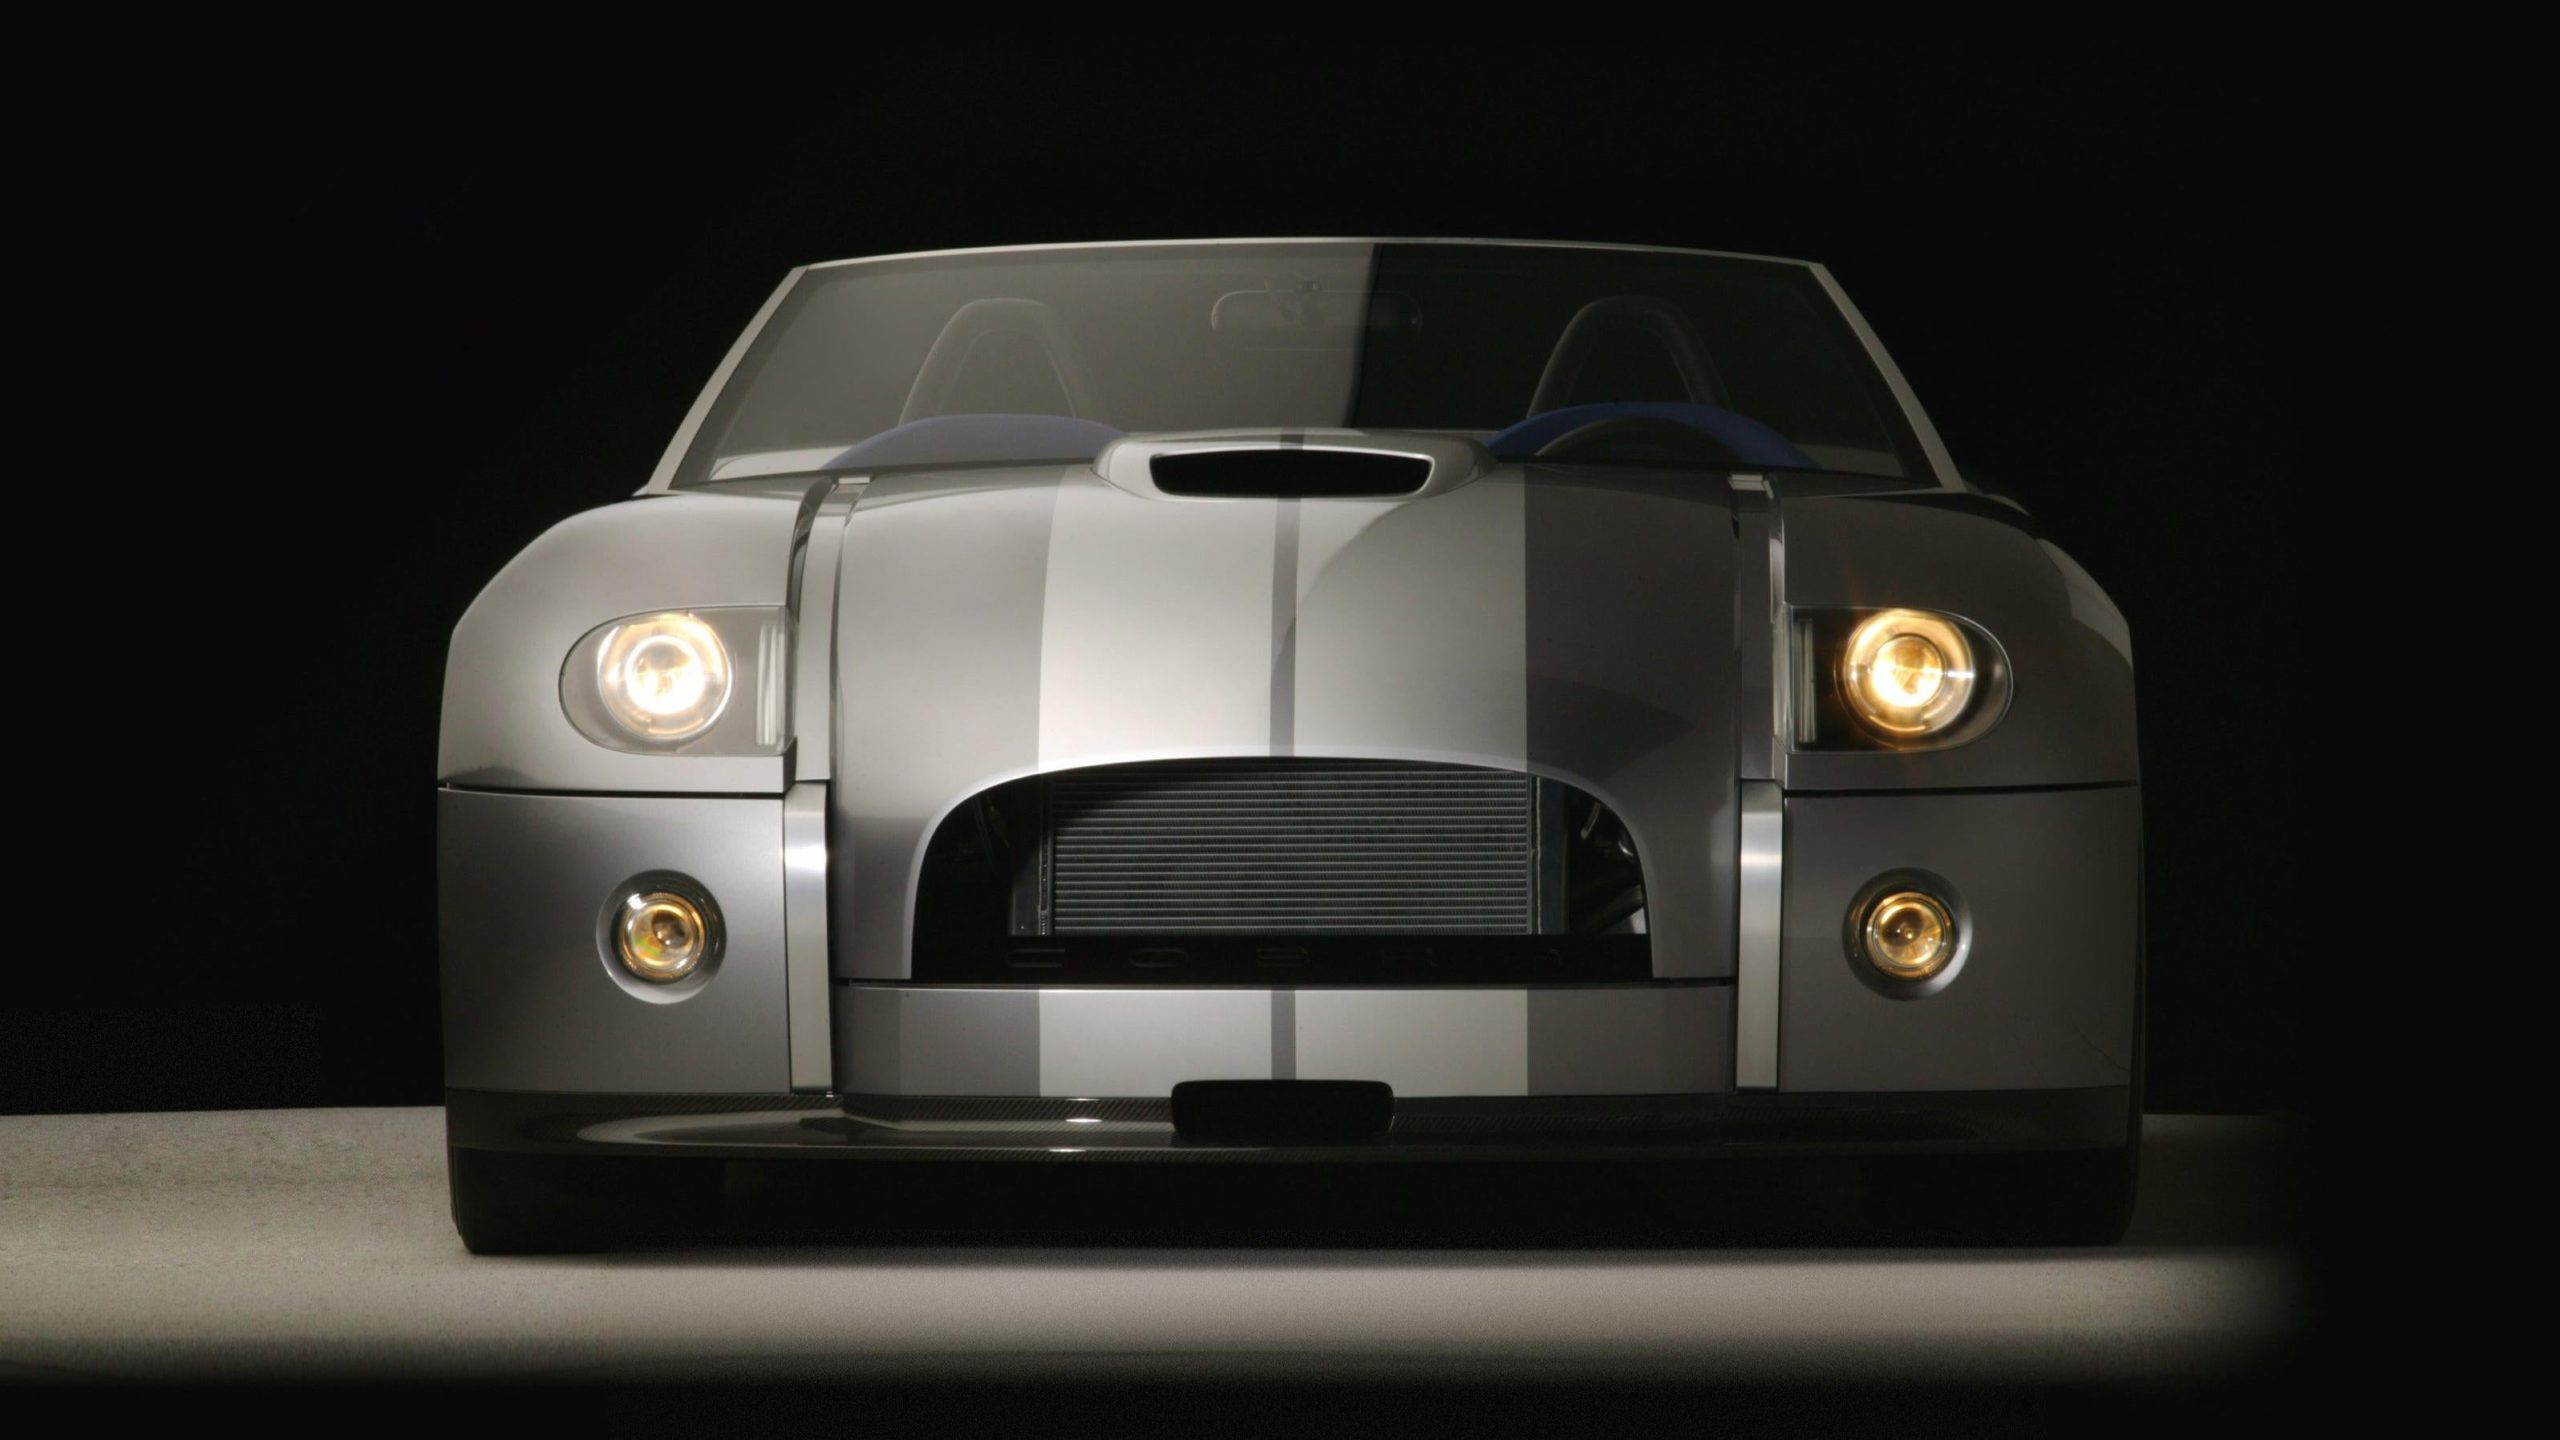 There’s A Fairytale Story Behind The 2004 Ford Shelby Cobra Concept